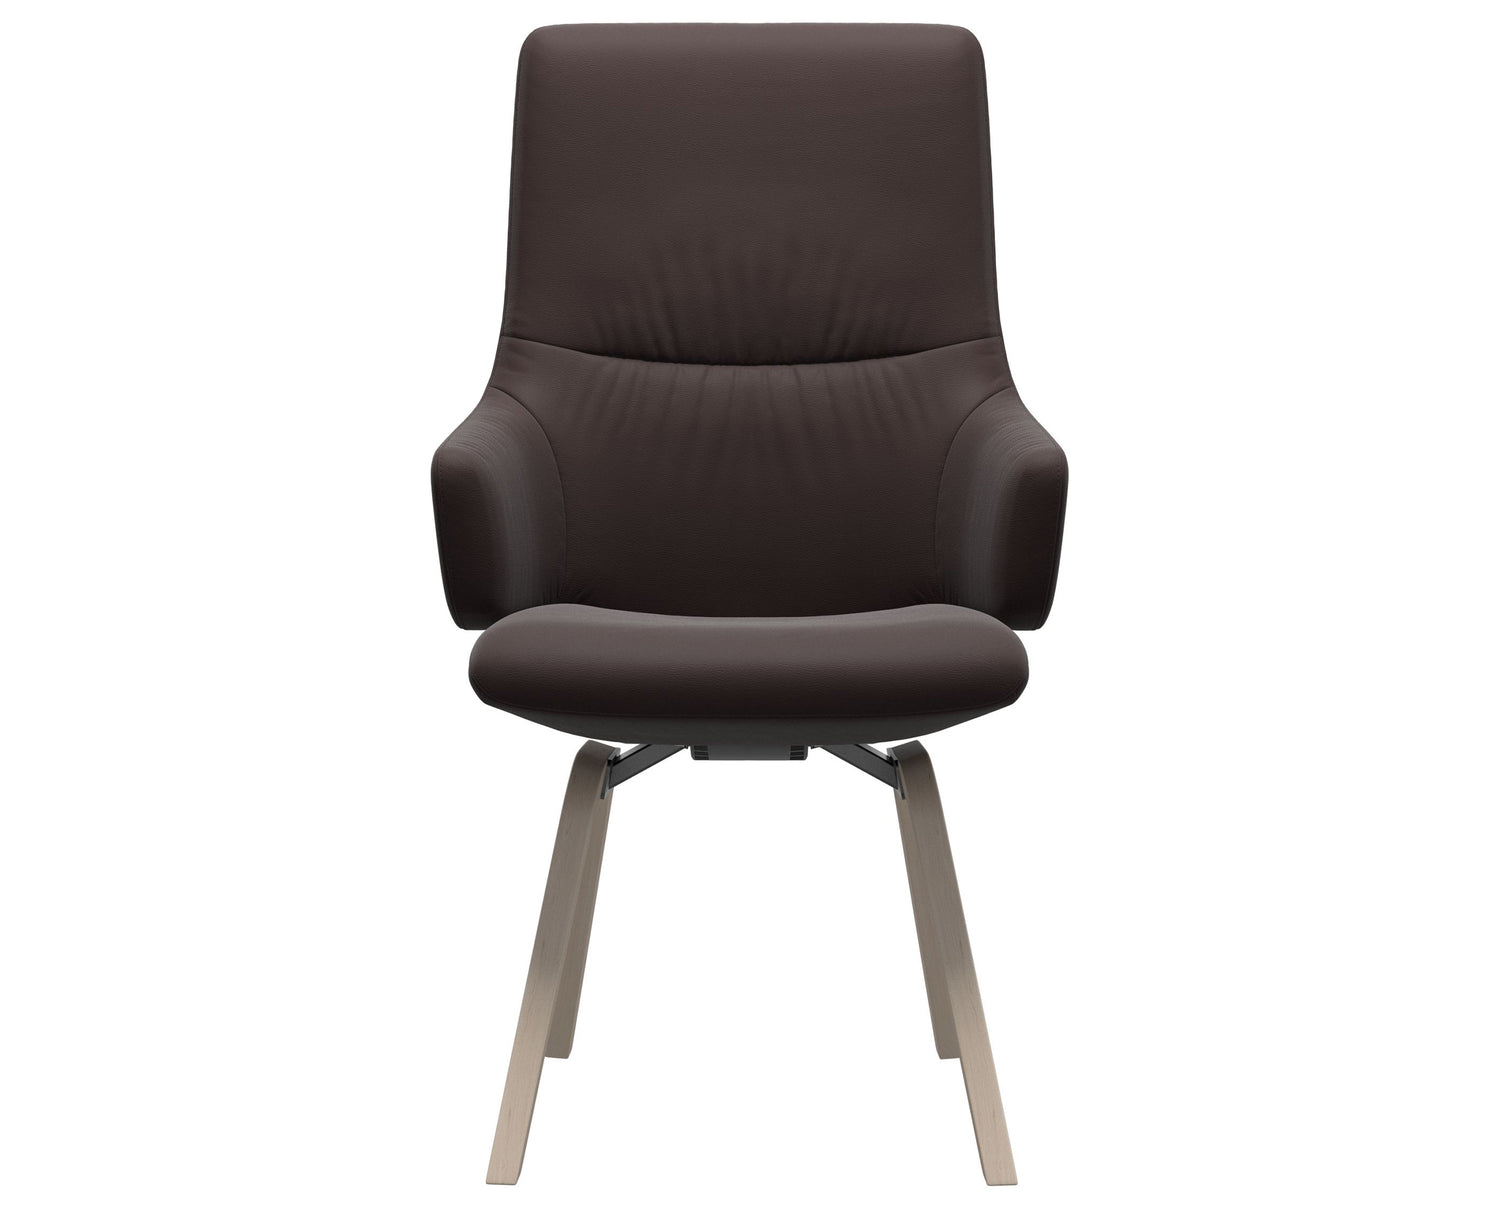 Paloma Leather Chocolate & Whitewash Base | Stressless Mint High Back D200 Dining Chair w/Arms | Valley Ridge Furniture